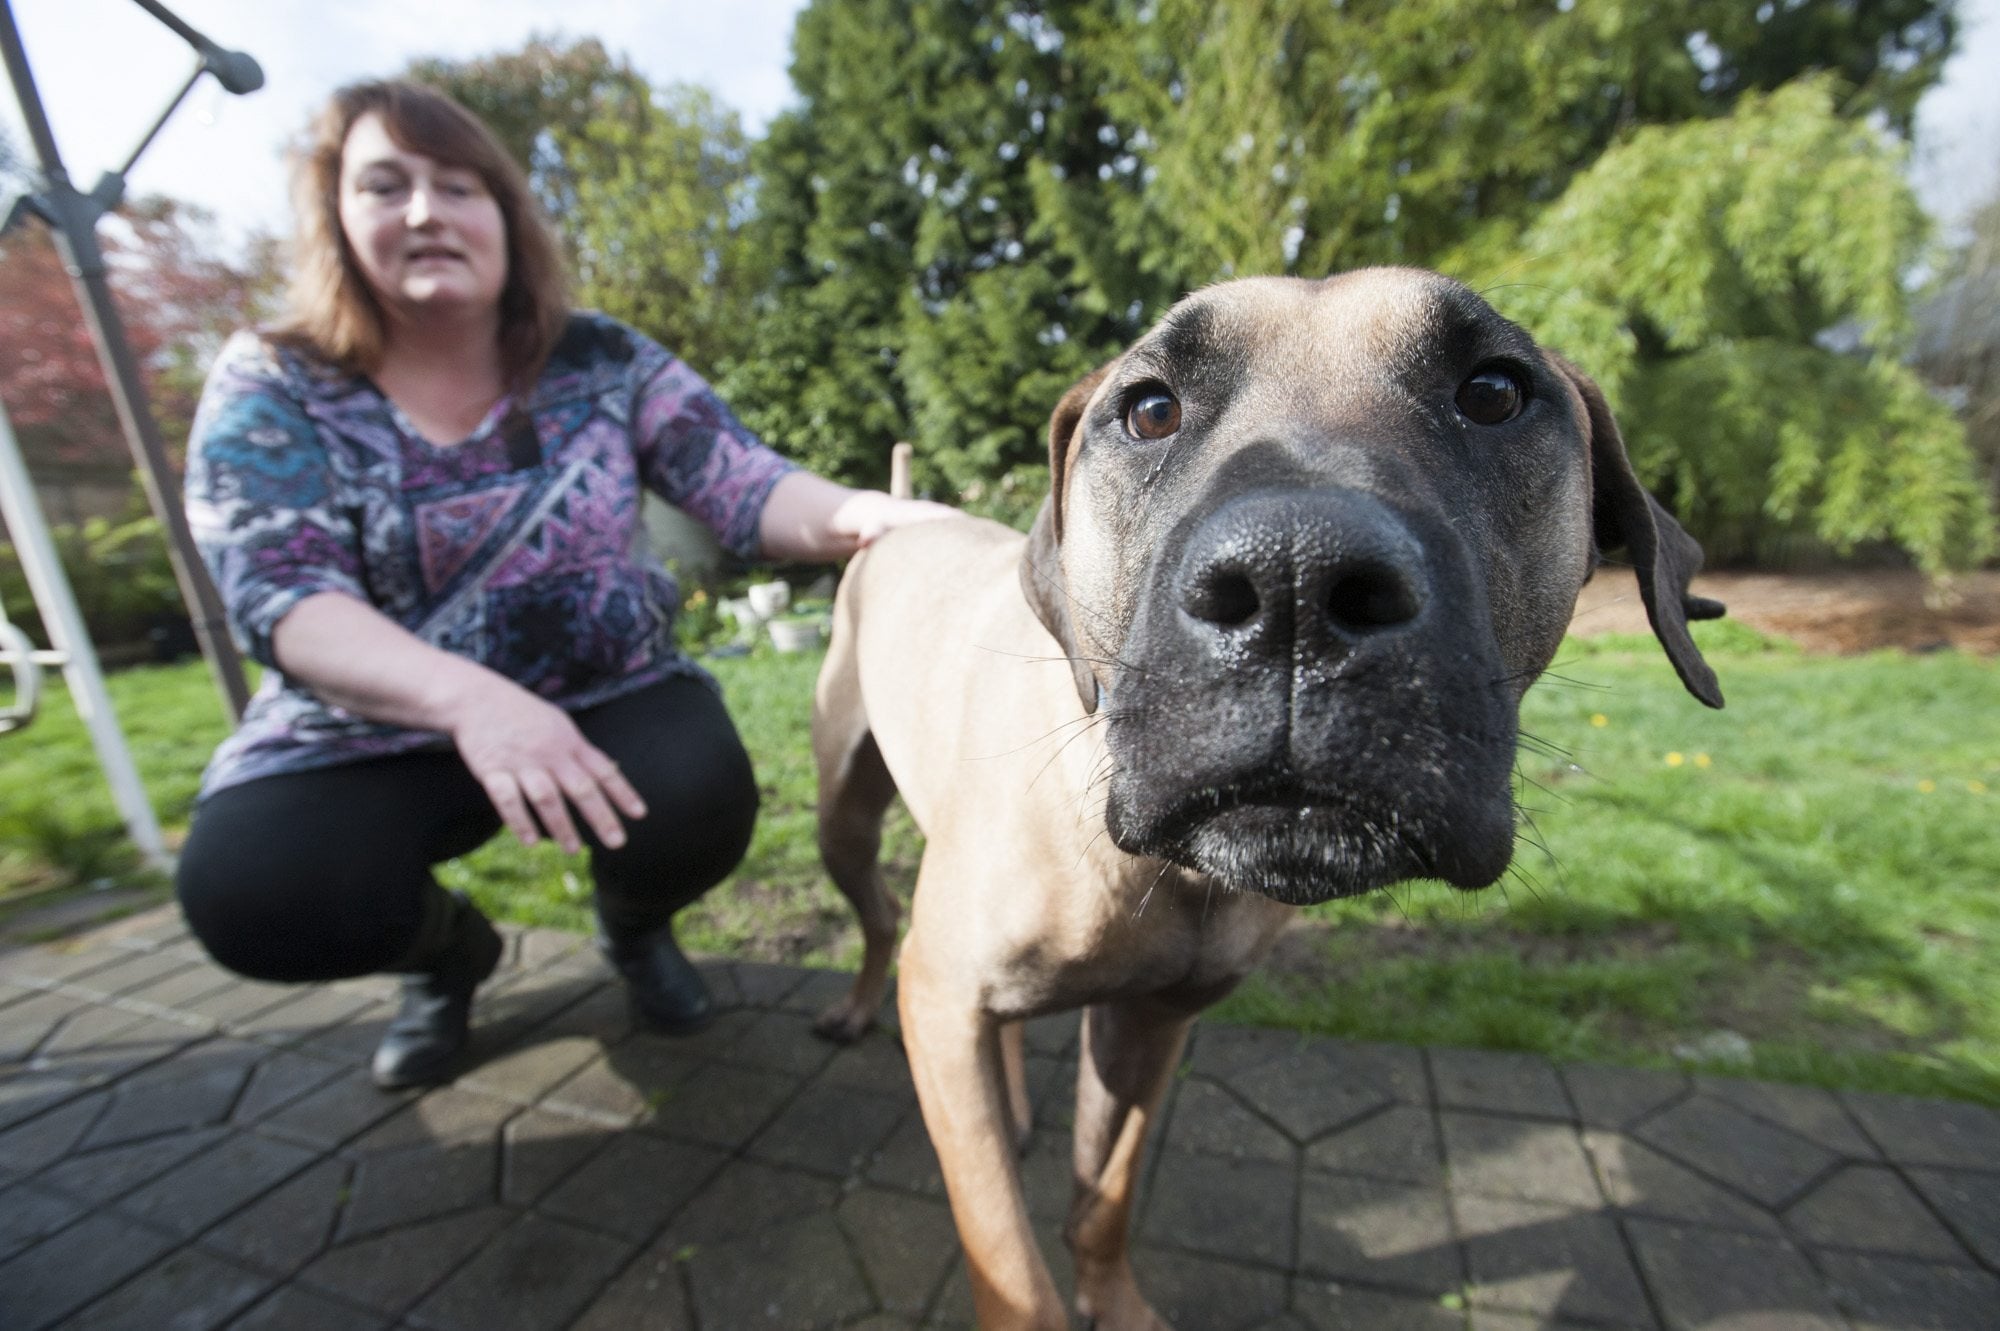 Japanese mastiff Rey, who is available for adoption, checks out a photographer&#039;s camera with foster mother Melissa Plate of Vancouver at his side. Rey was among more than 100 dogs rescued from a South Korean dog meat farm in September.